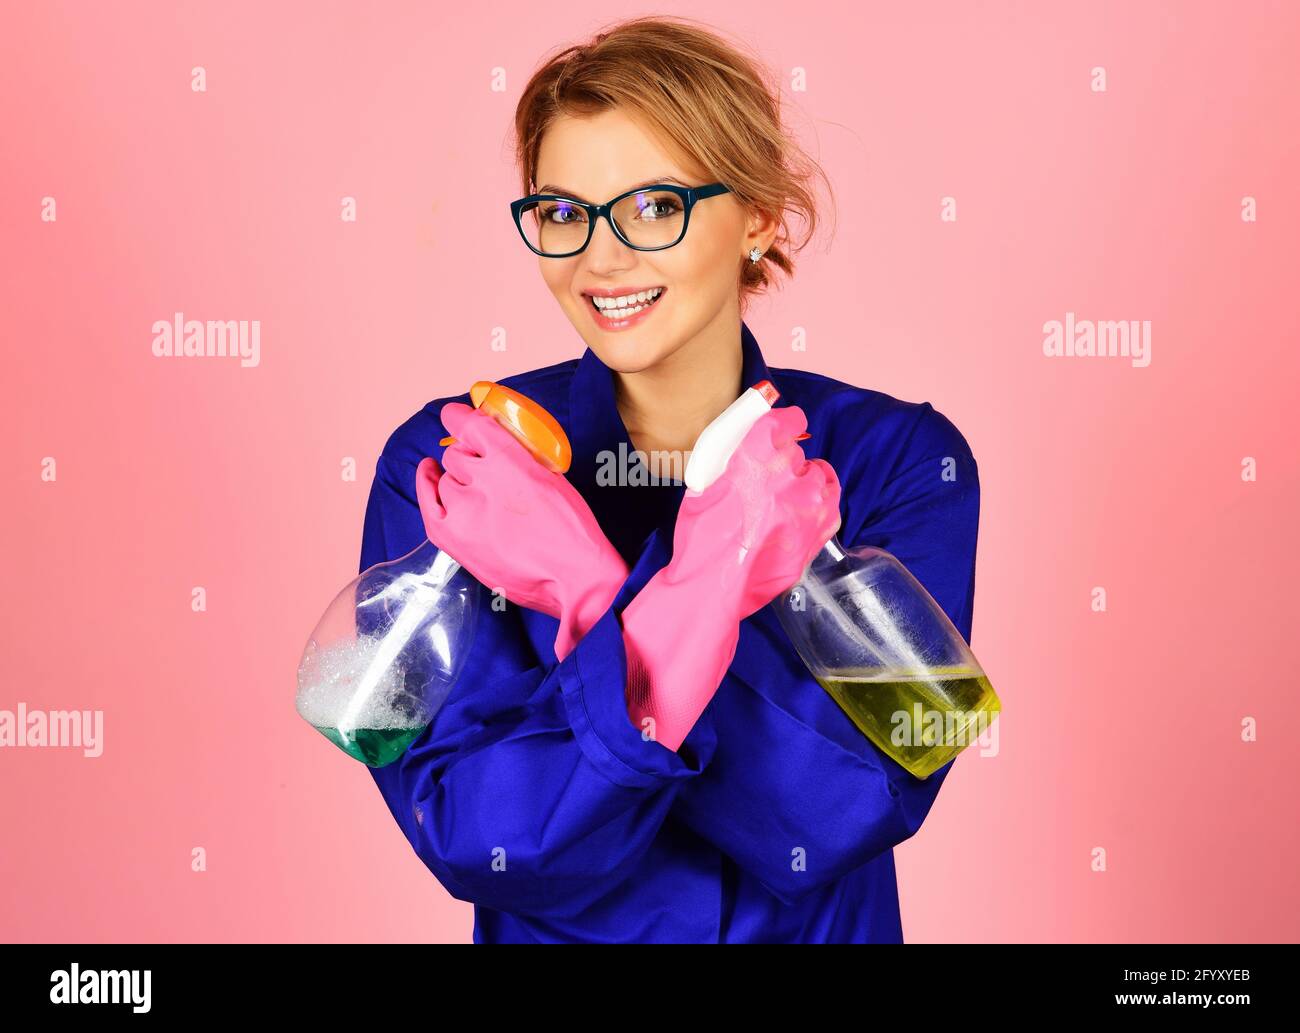 Happy woman in uniform and rubber gloves with cleaning spray. Professional cleaning service. Stock Photo